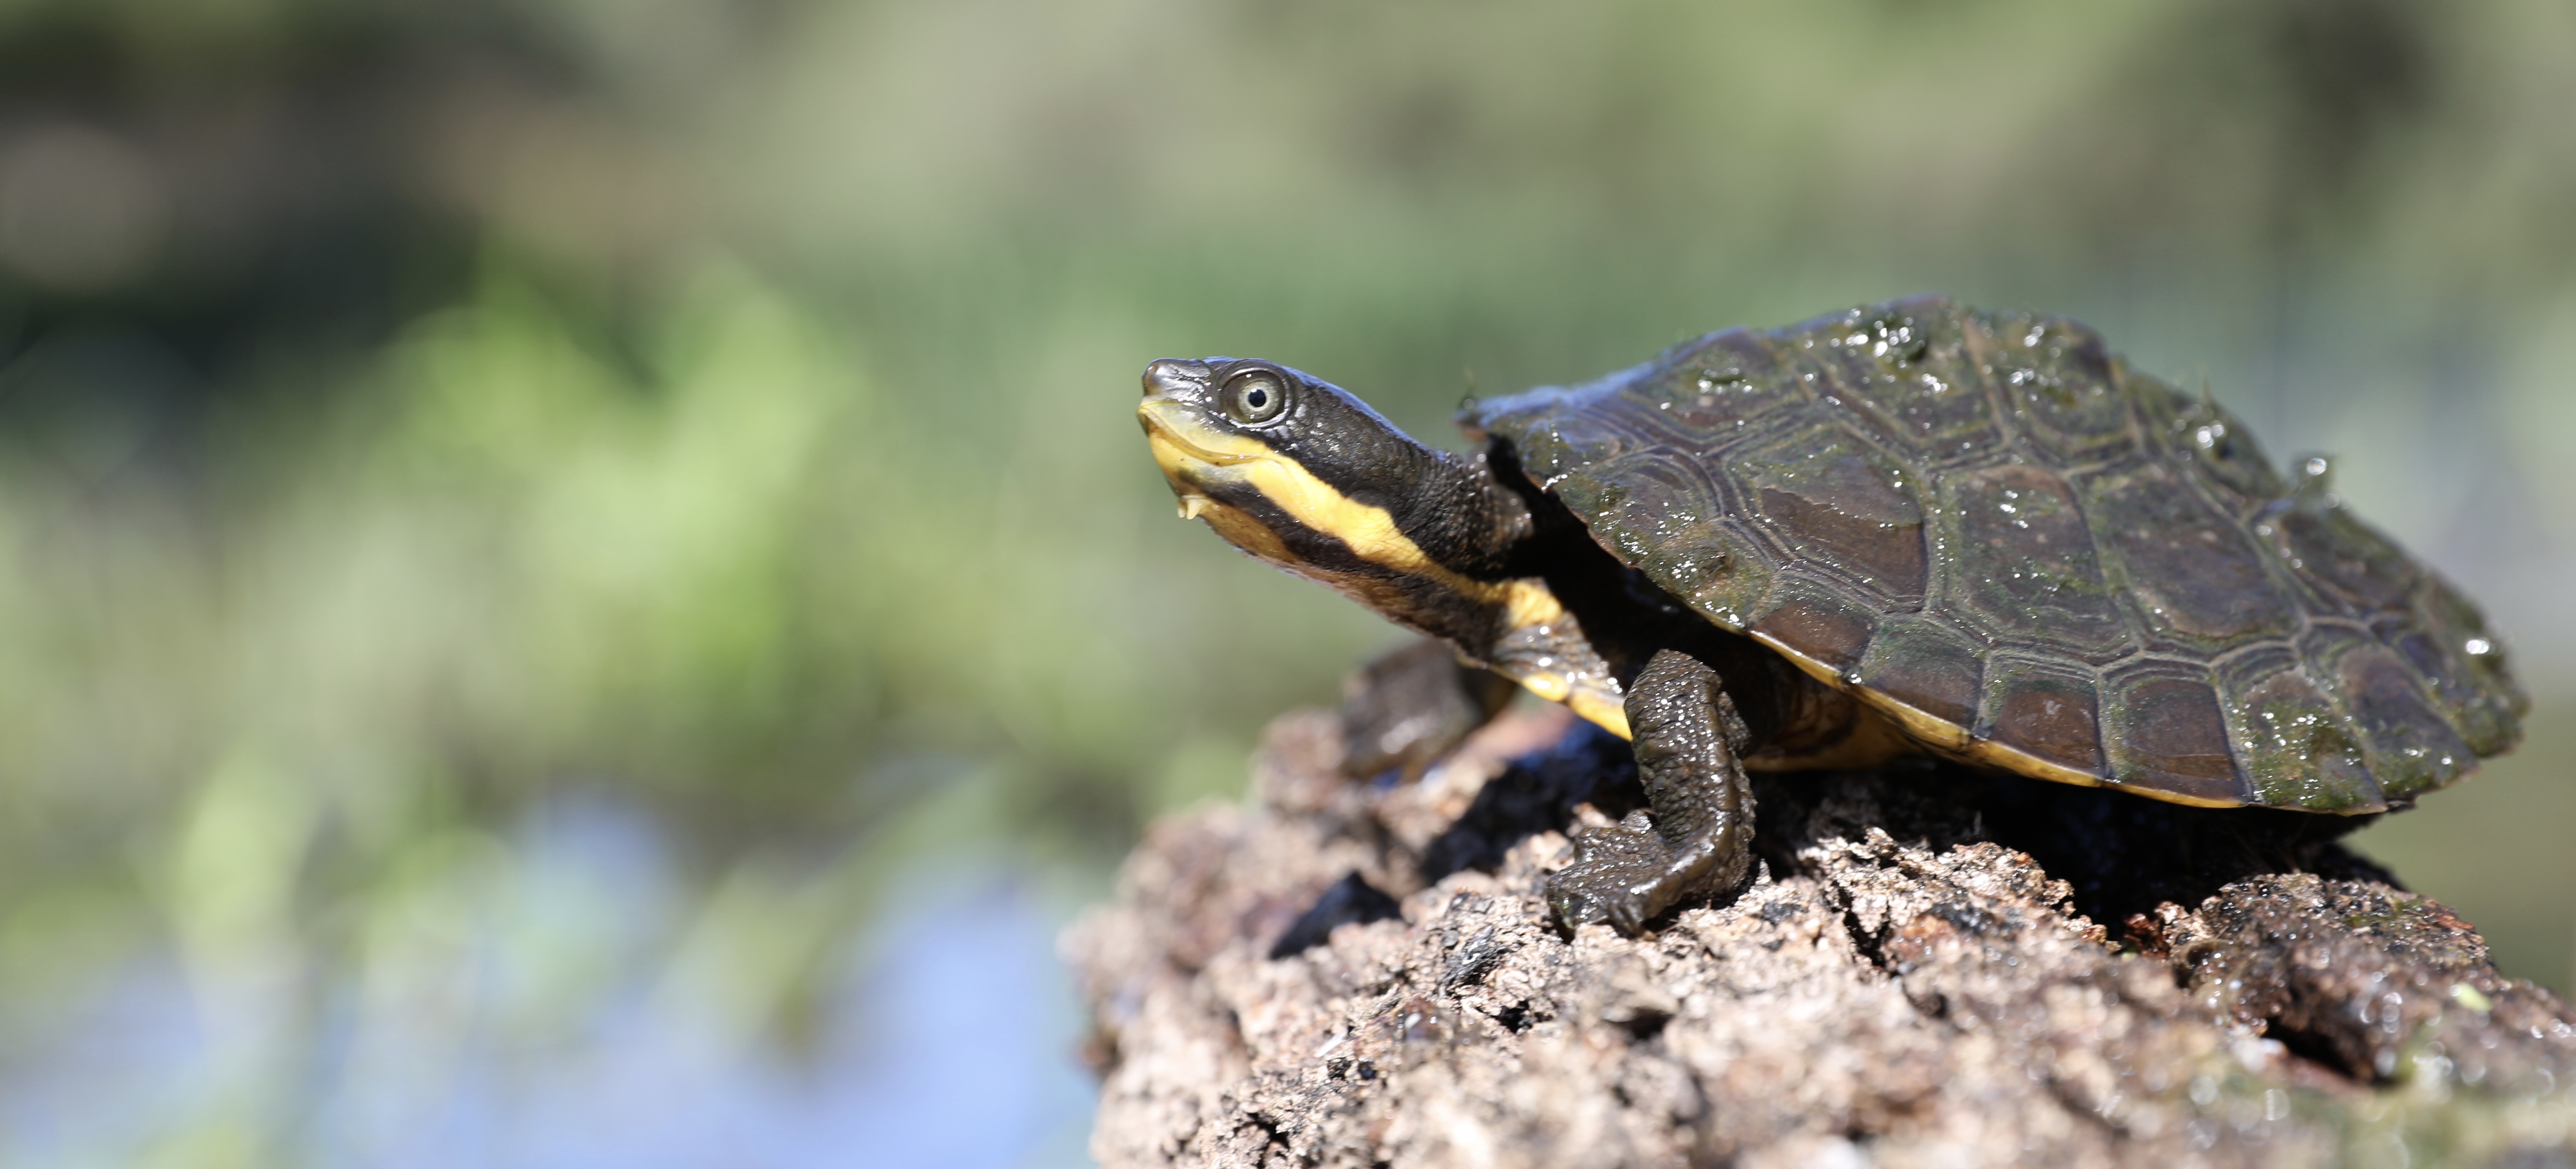 Manning River Turtle to get lifeline from Australian Reptile Park